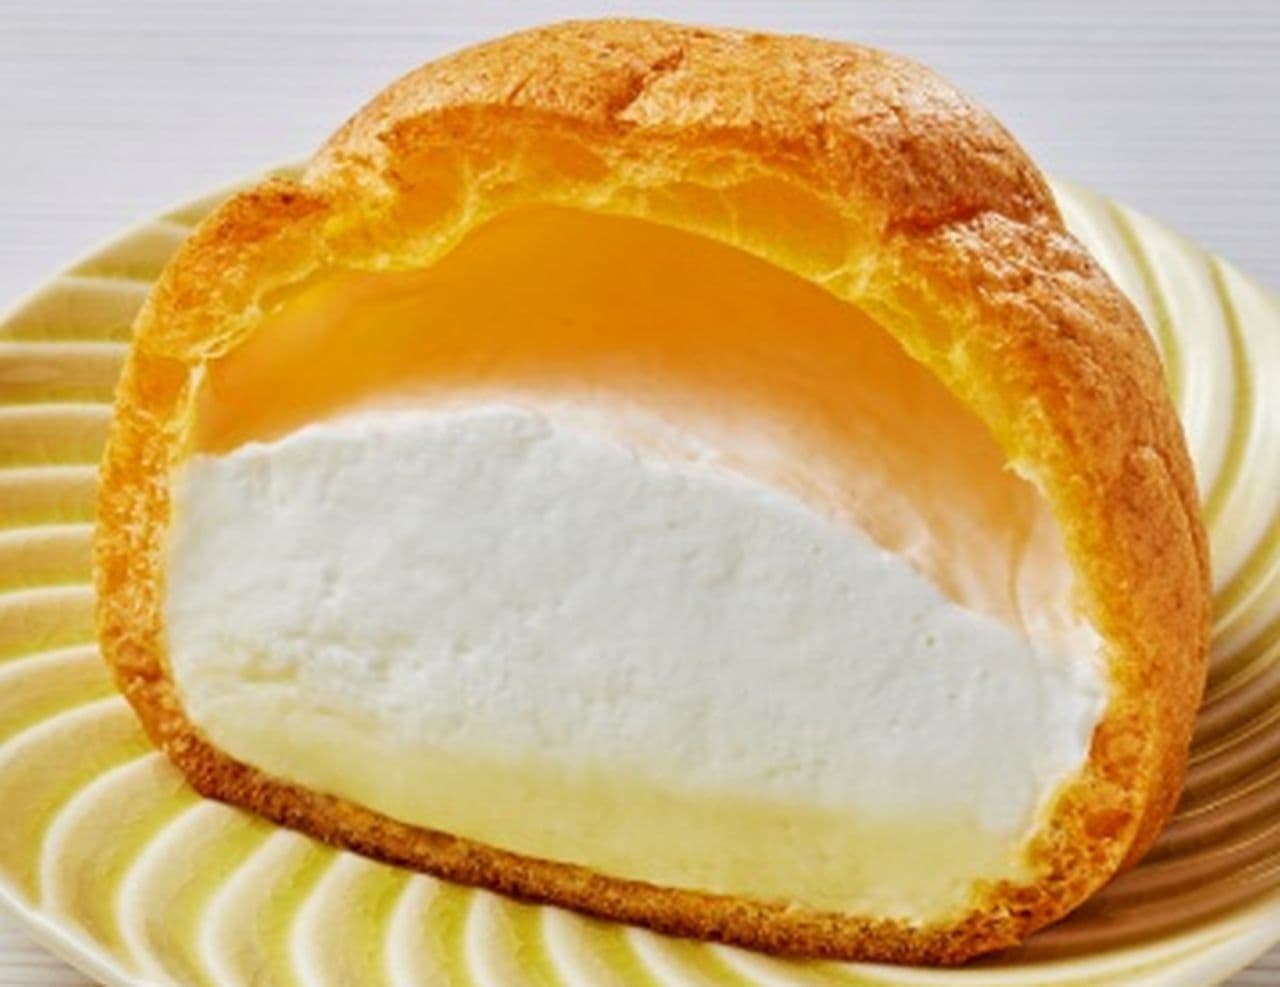 LAWSON to launch a total of three new products: cream puffs made with Niigata pears and soufflé bread made with rice flour and milk.